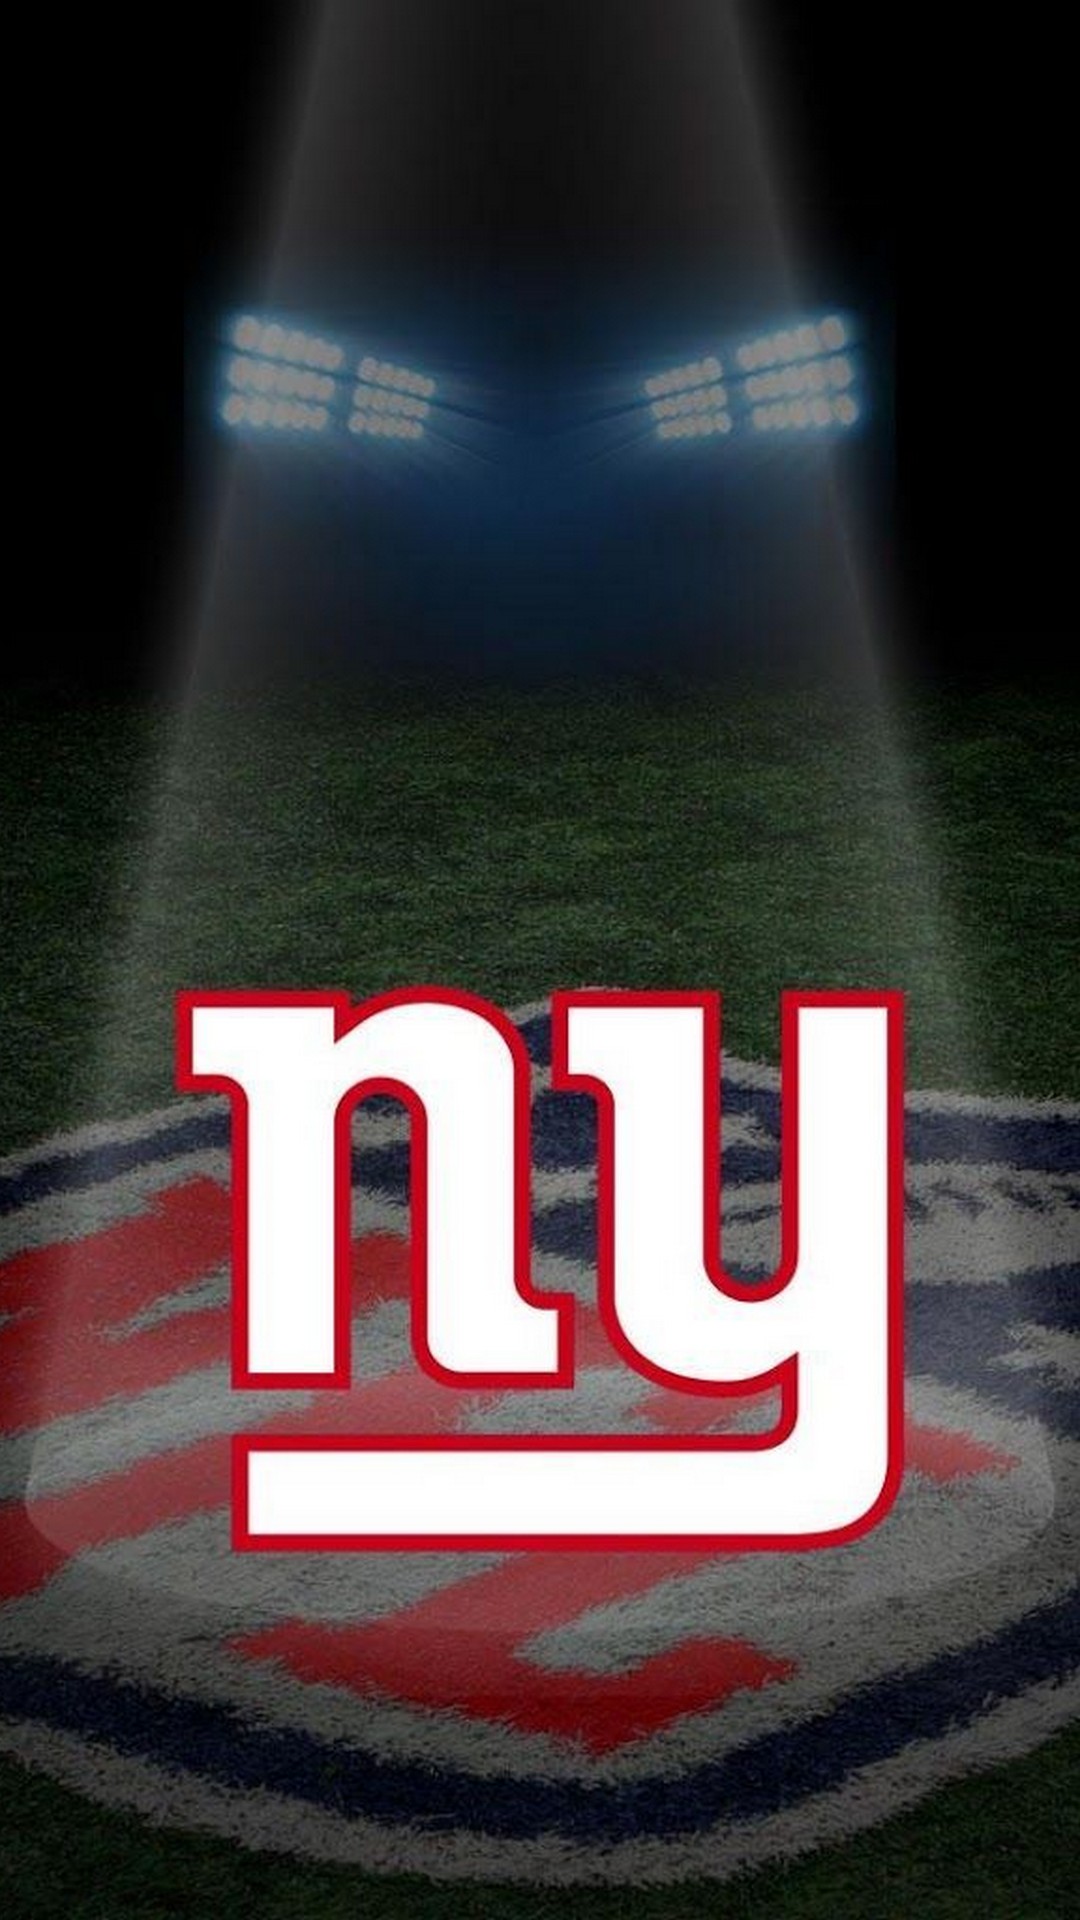 New York Giants iPhone Wallpaper Size with high-resolution 1080x1920 pixel. Donwload and set as wallpaper for your iPhone X, iPhone XS home screen backgrounds, XS Max, XR, iPhone8 lock screen wallpaper, iPhone 7, 6, SE and other mobile devices